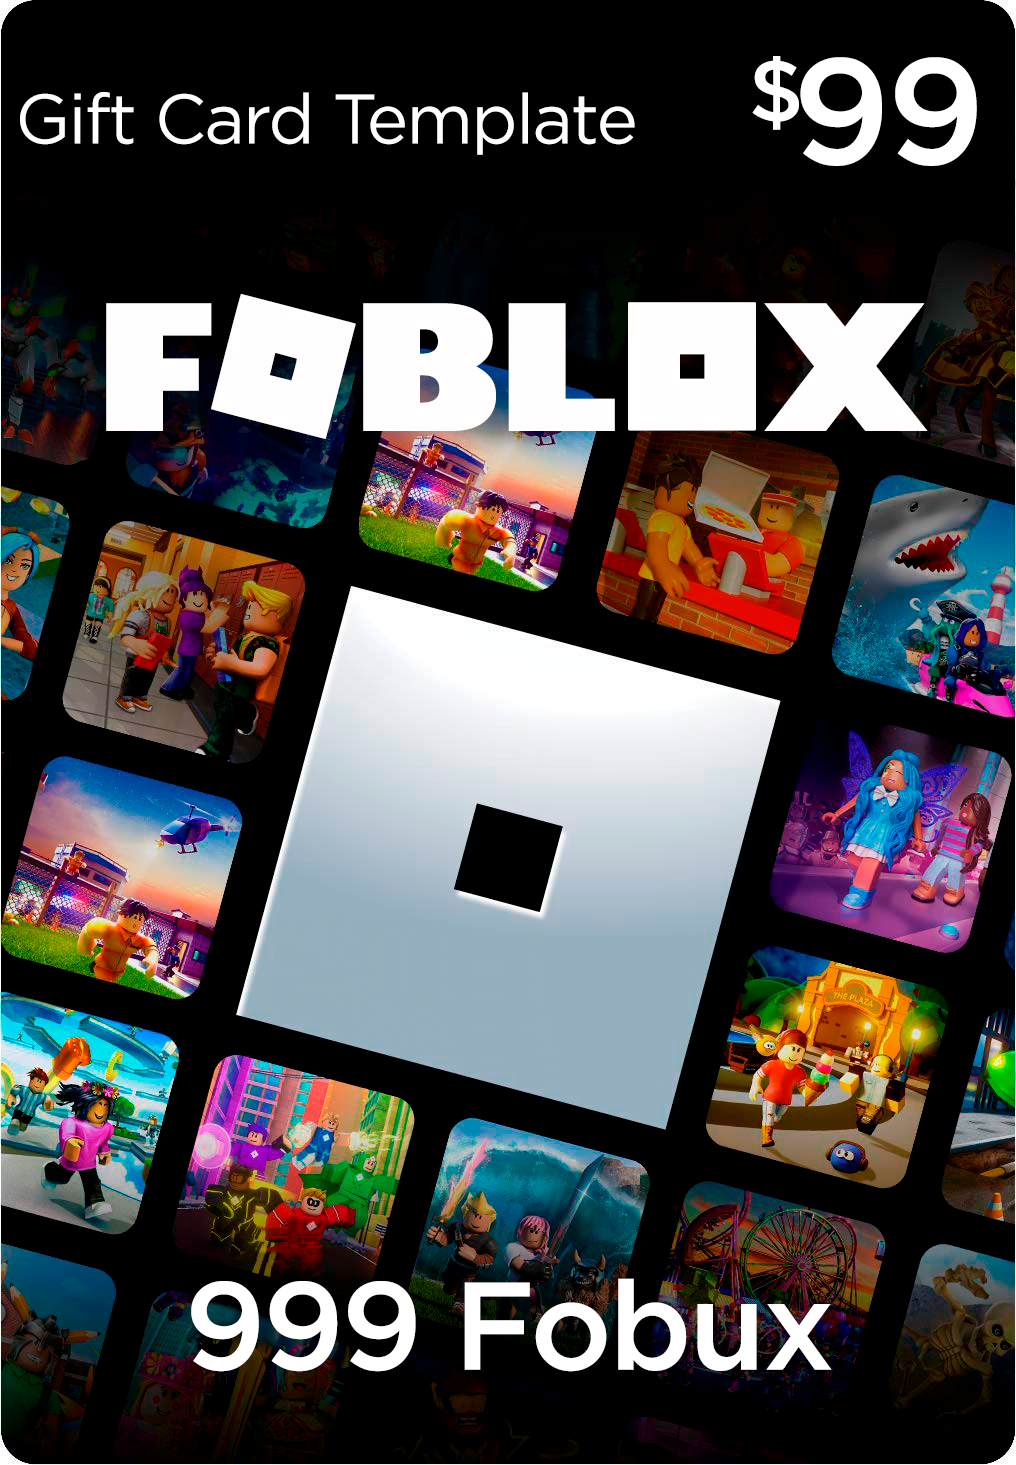 Roblox Gift Card Template By HeXp PSD By Hexpppppppppppppppp On